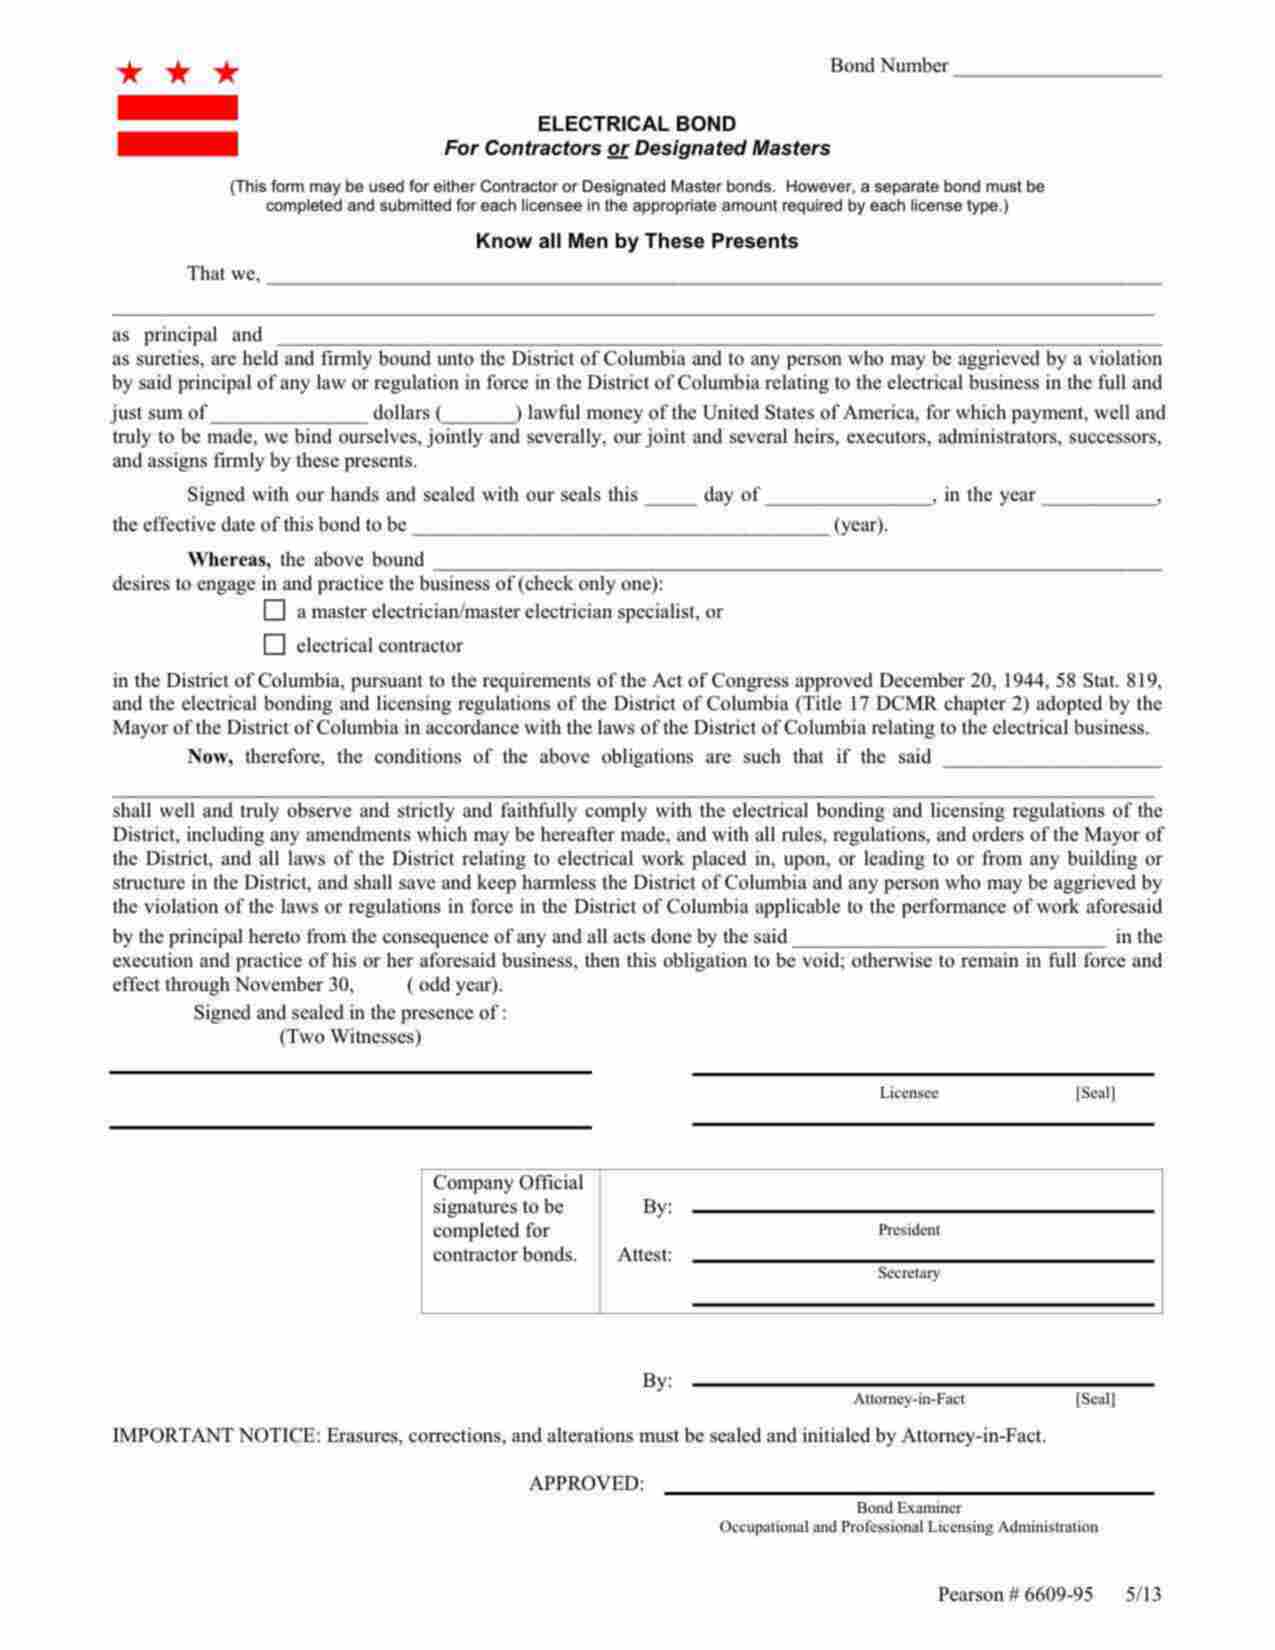 District of Columbia Electrical Contractor Bond Form